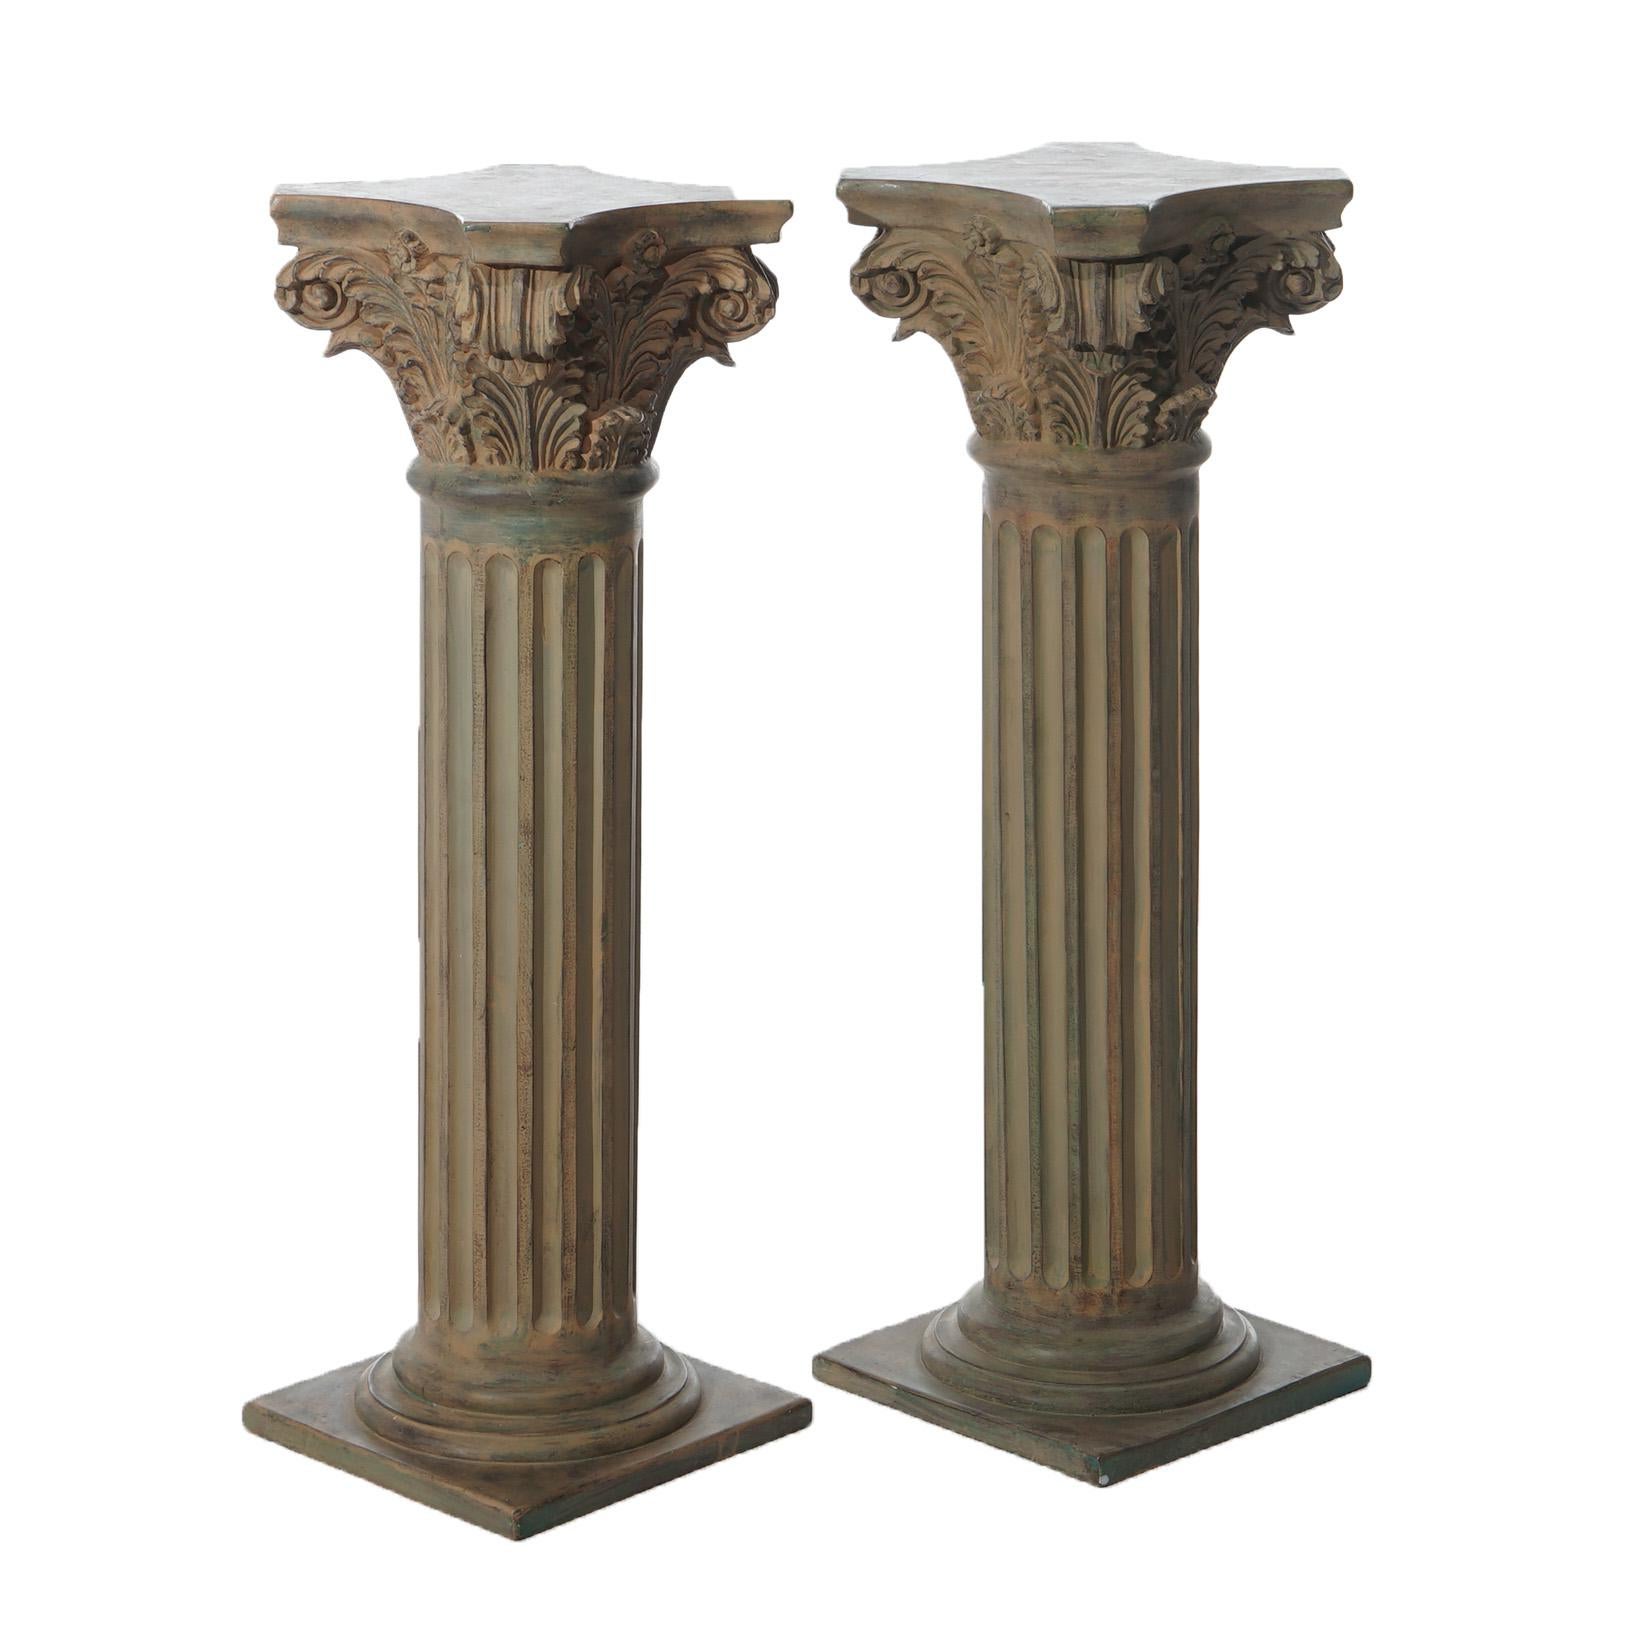 Pair Neoclassical Corinthian Column Form Composite Sculpture Pedestals 20thC In Good Condition For Sale In Big Flats, NY